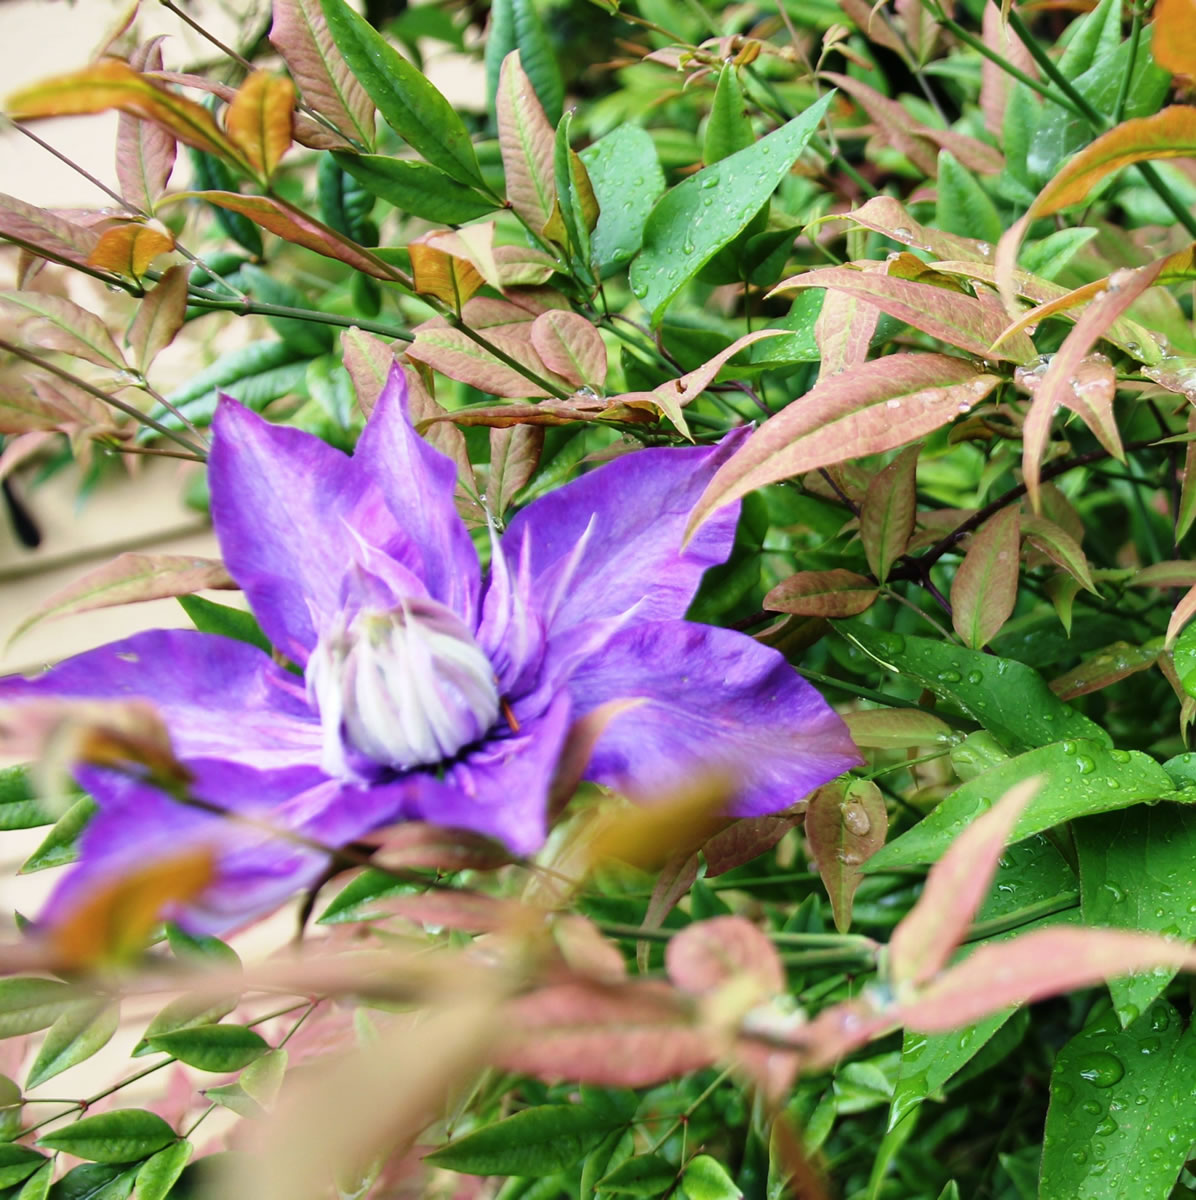 A late-blooming clematis clambers through the autumn foliage of heavenly bamboo.